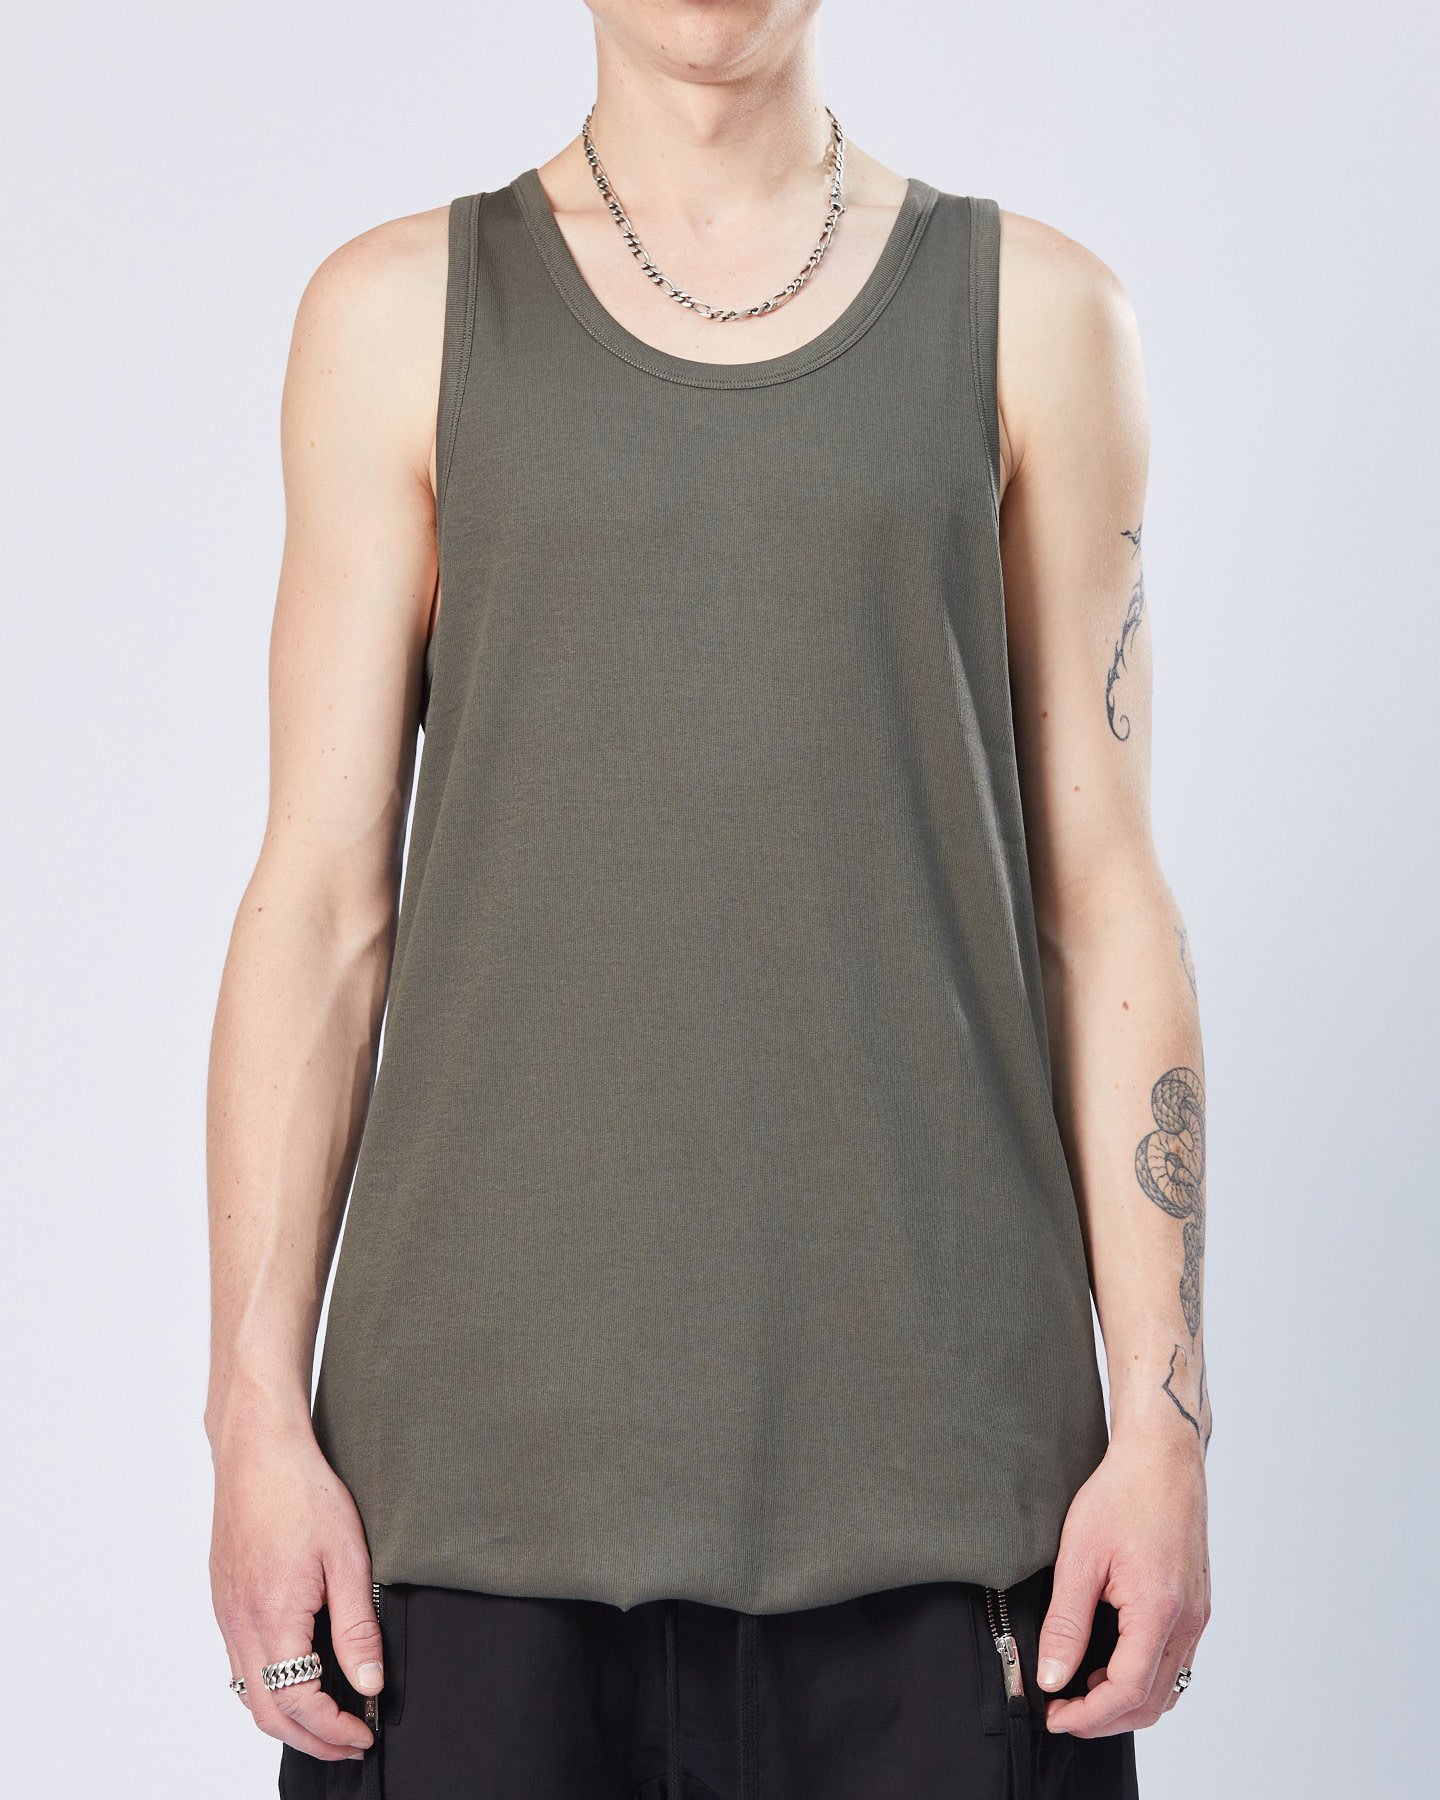 STRETCH COTTON FINE RIB FITTED TANK TOP - IVY